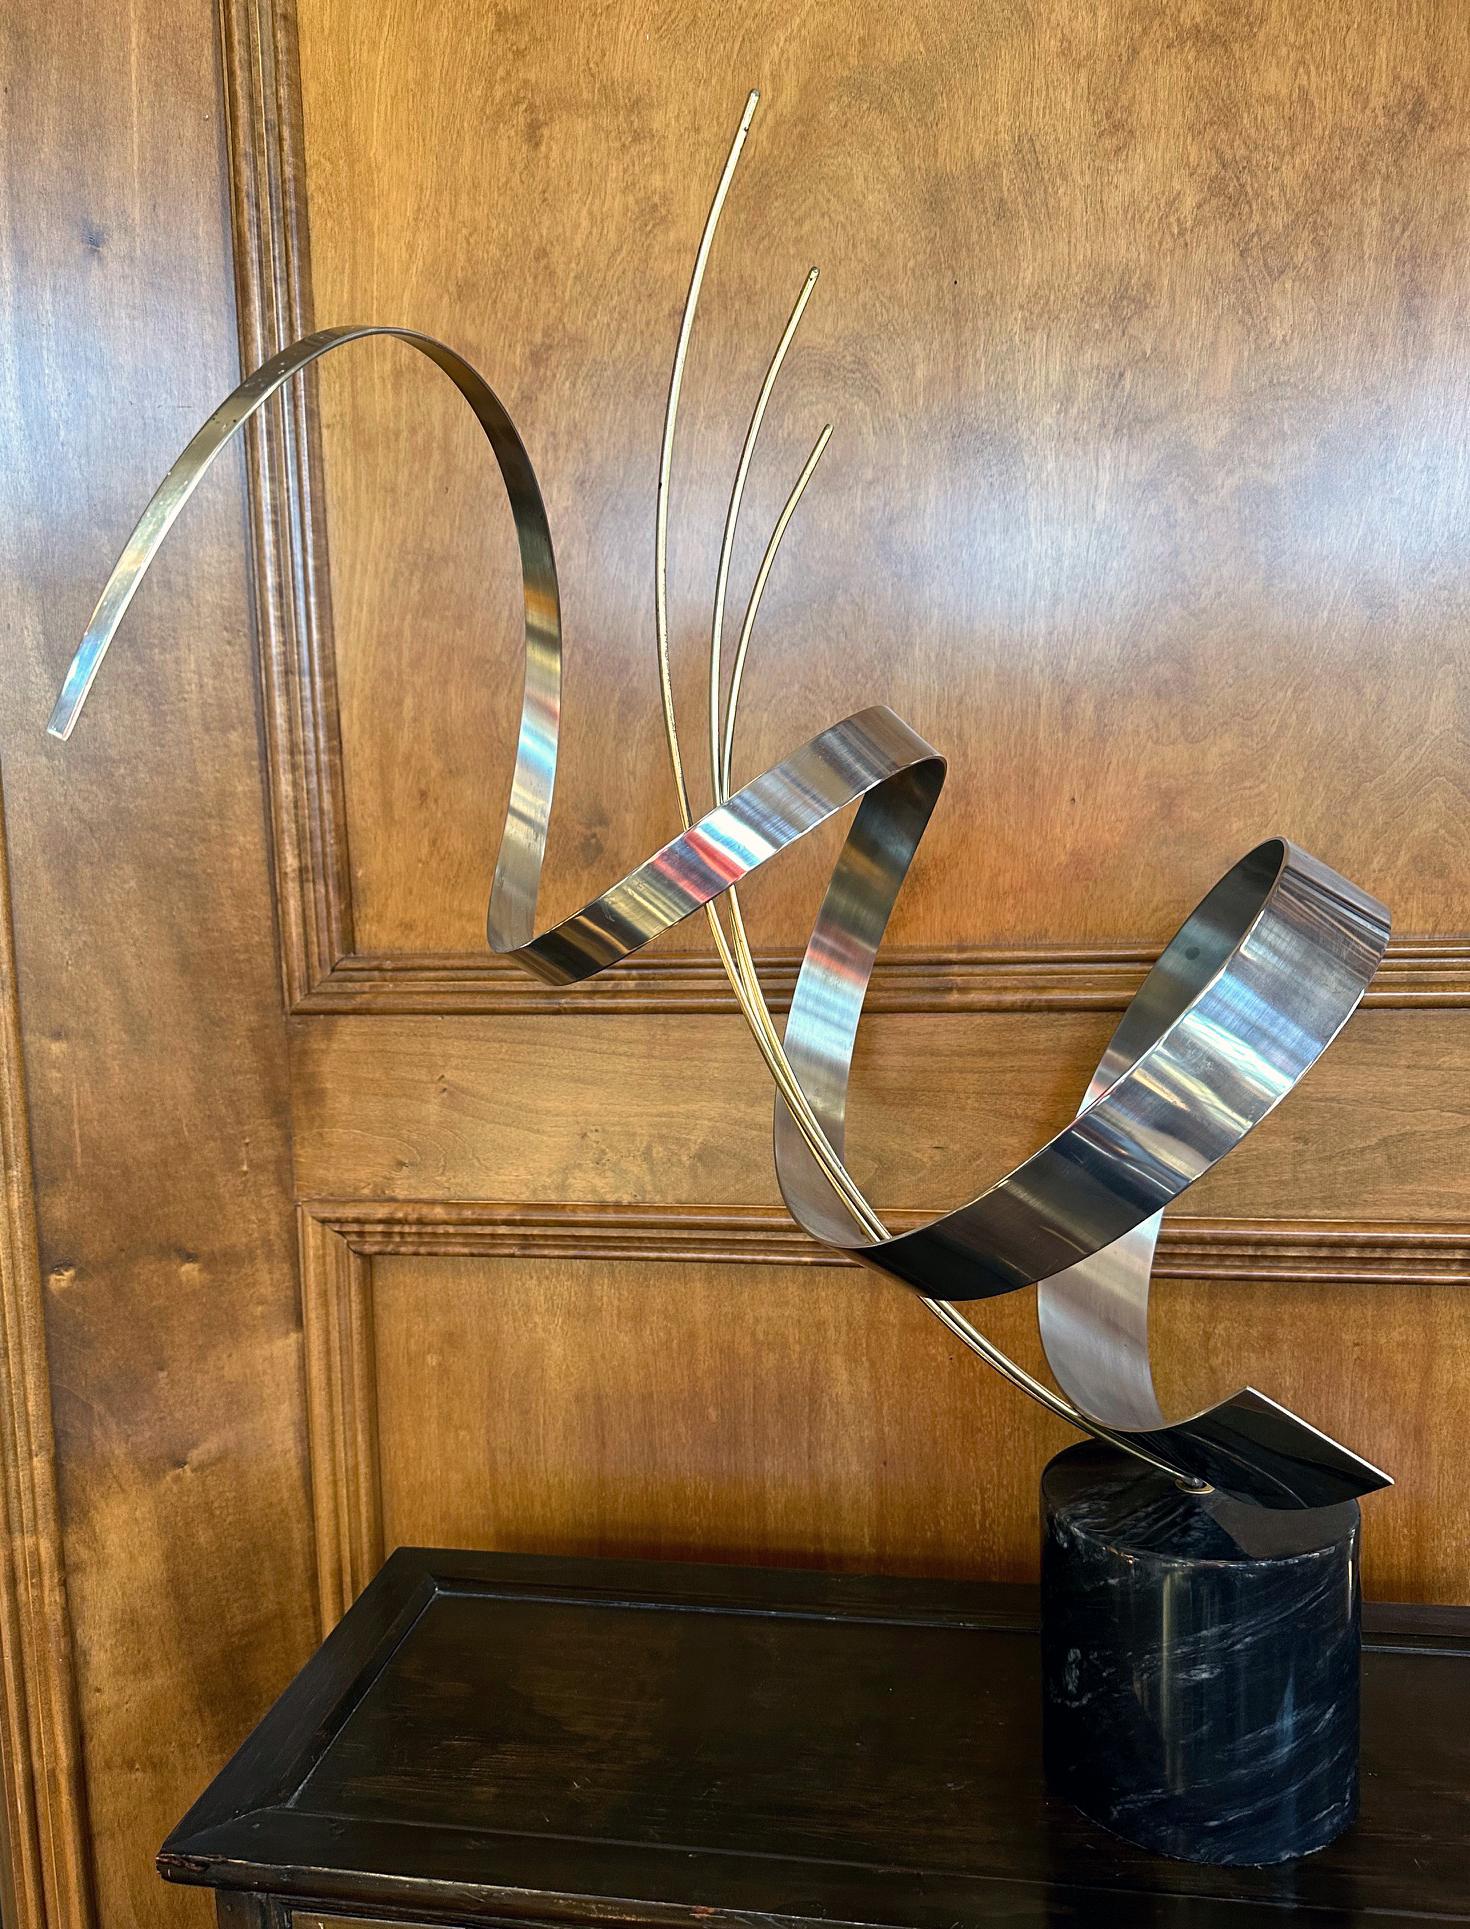 A vintage tabletop sculpture crafted by C. Jere and dated to 1978. The metal sculpture was constructed from chromed steel and brass in an abstract tapering spiral form with curved three brass rods in the center. It is installed on a marble pedestal